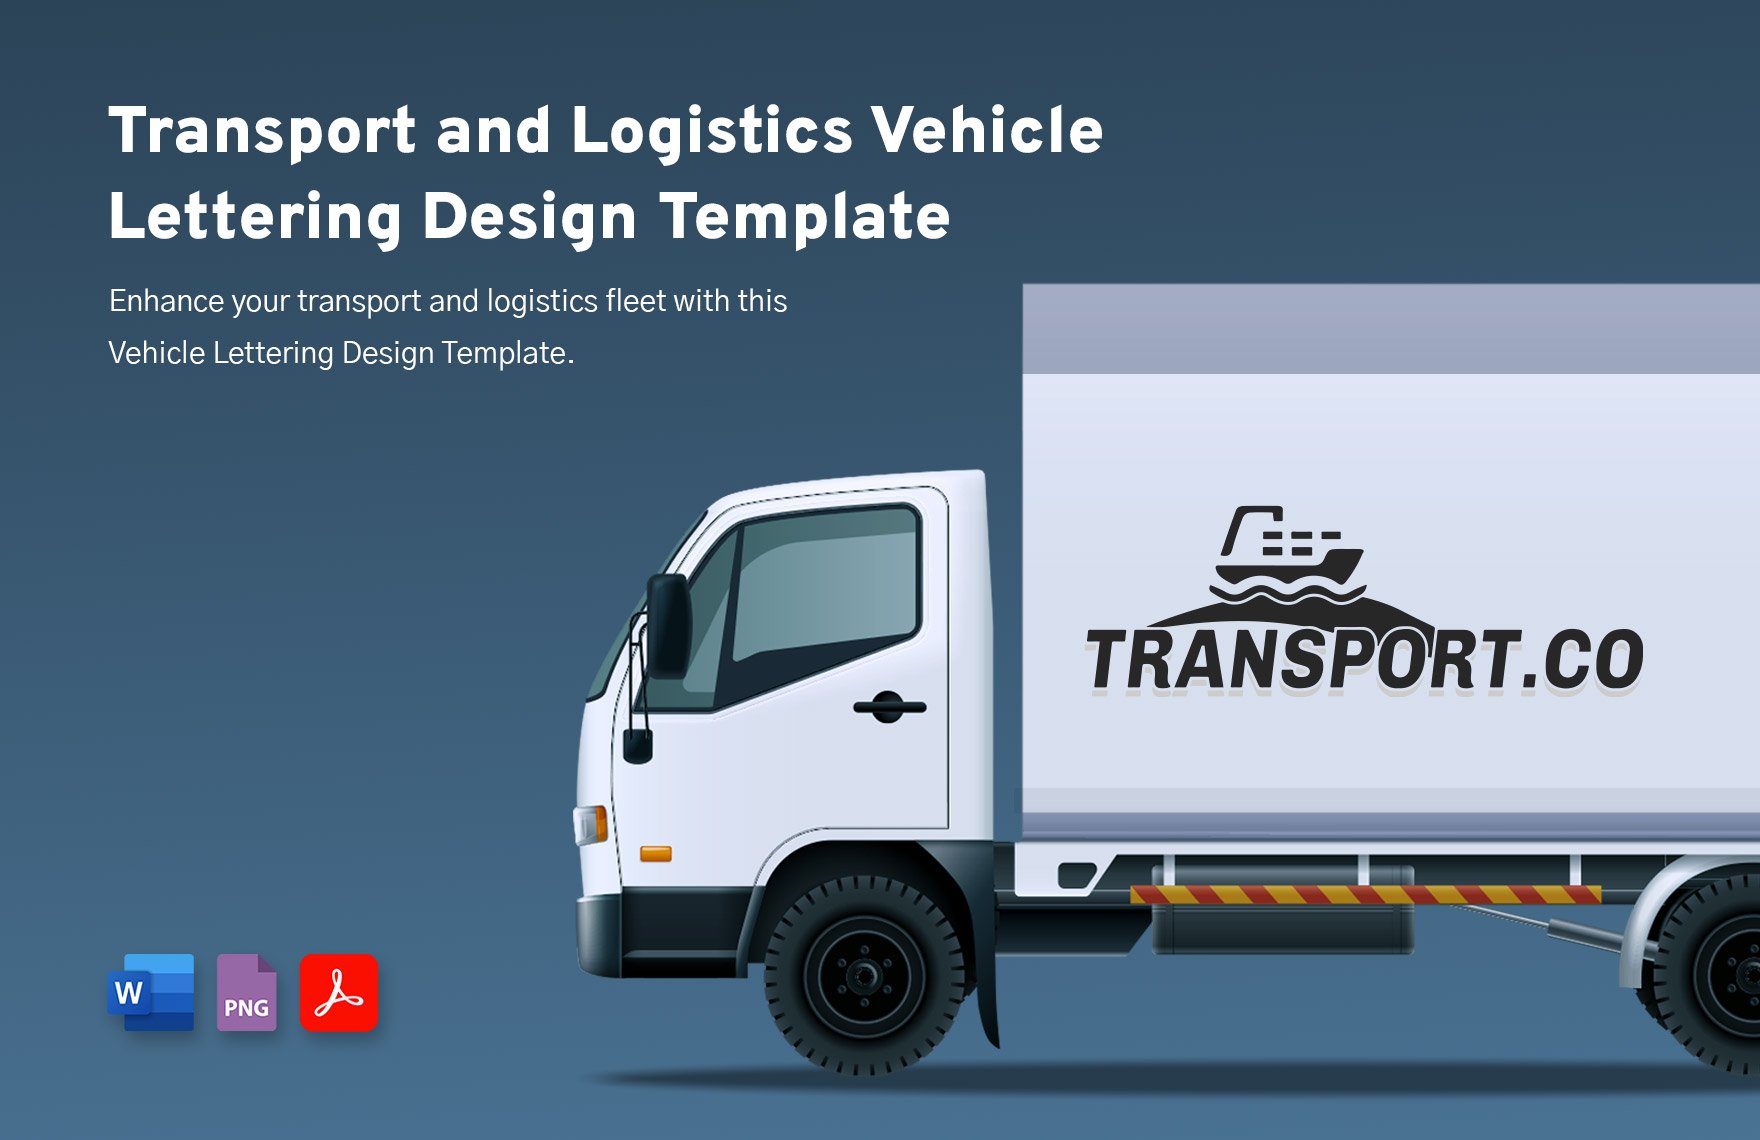 Transport and Logistics Vehicle Lettering Design Template